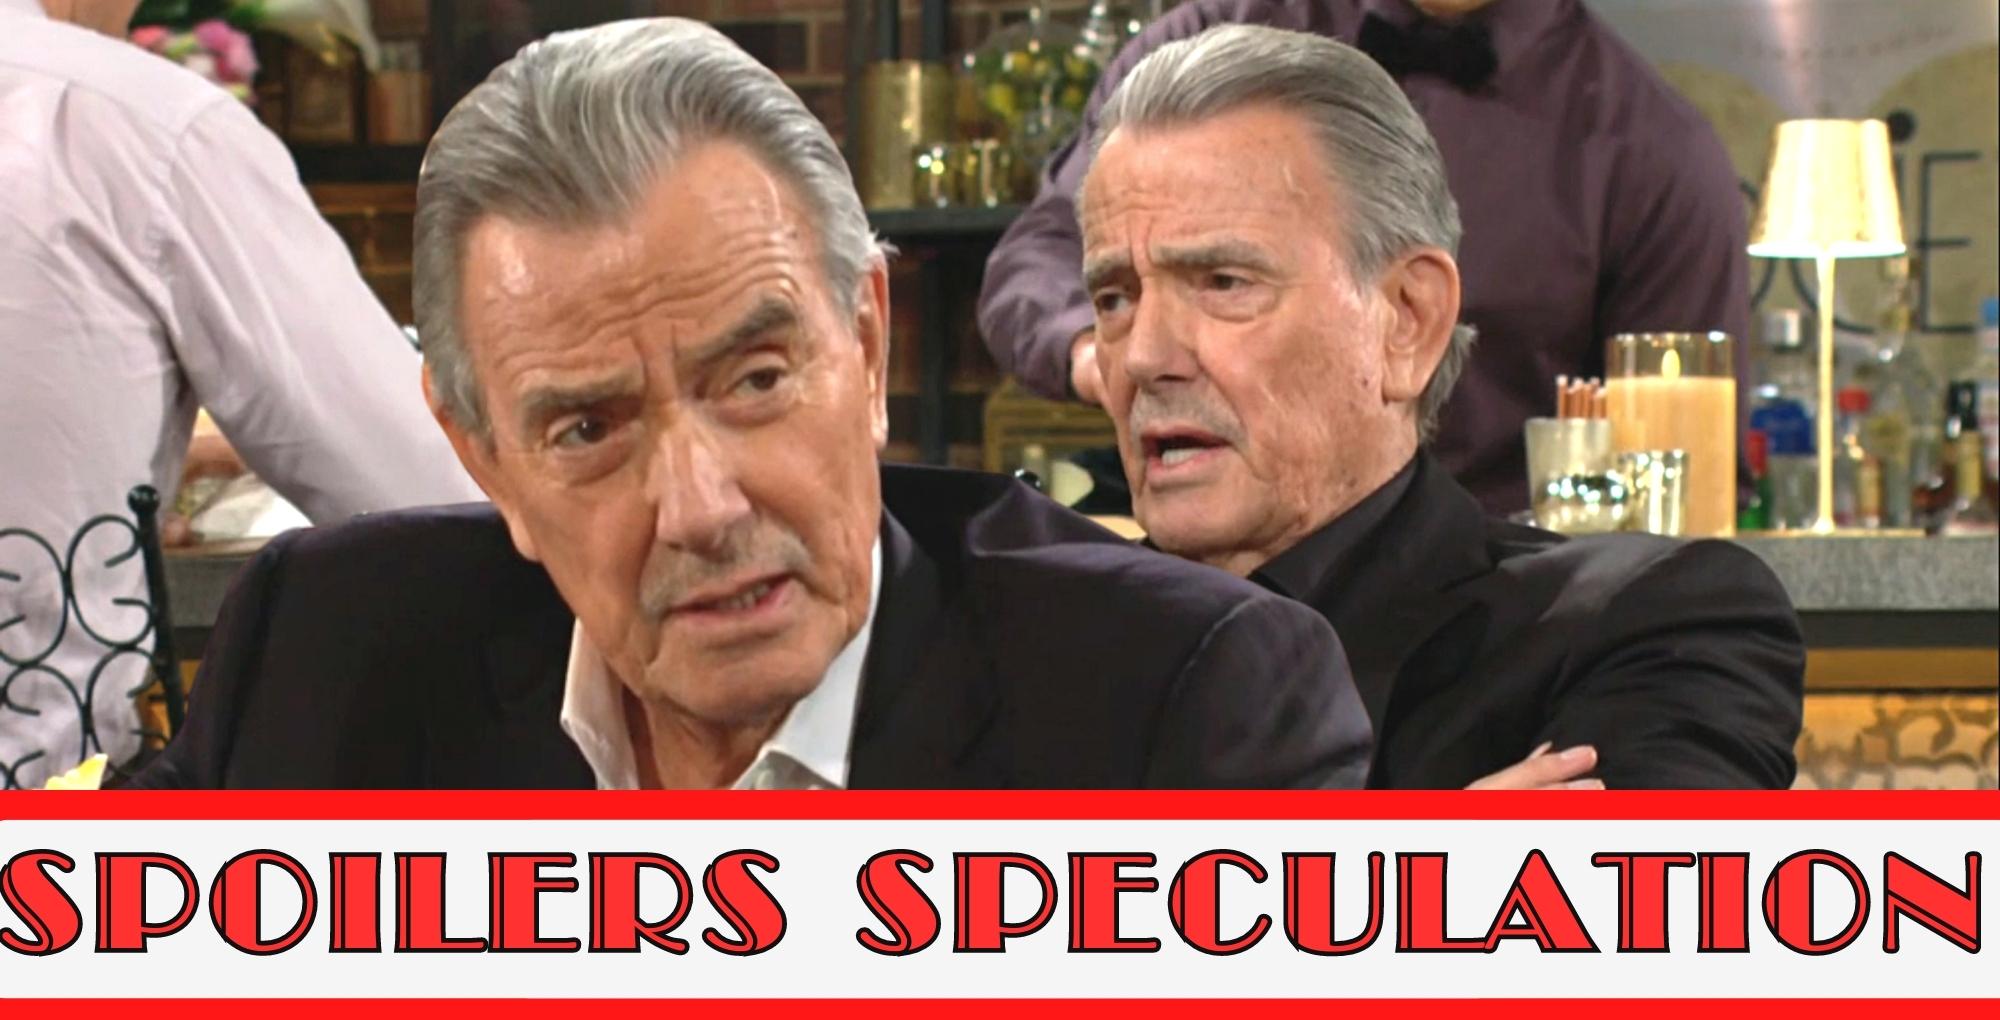 y&r spoilers speculation double image of victor newman.